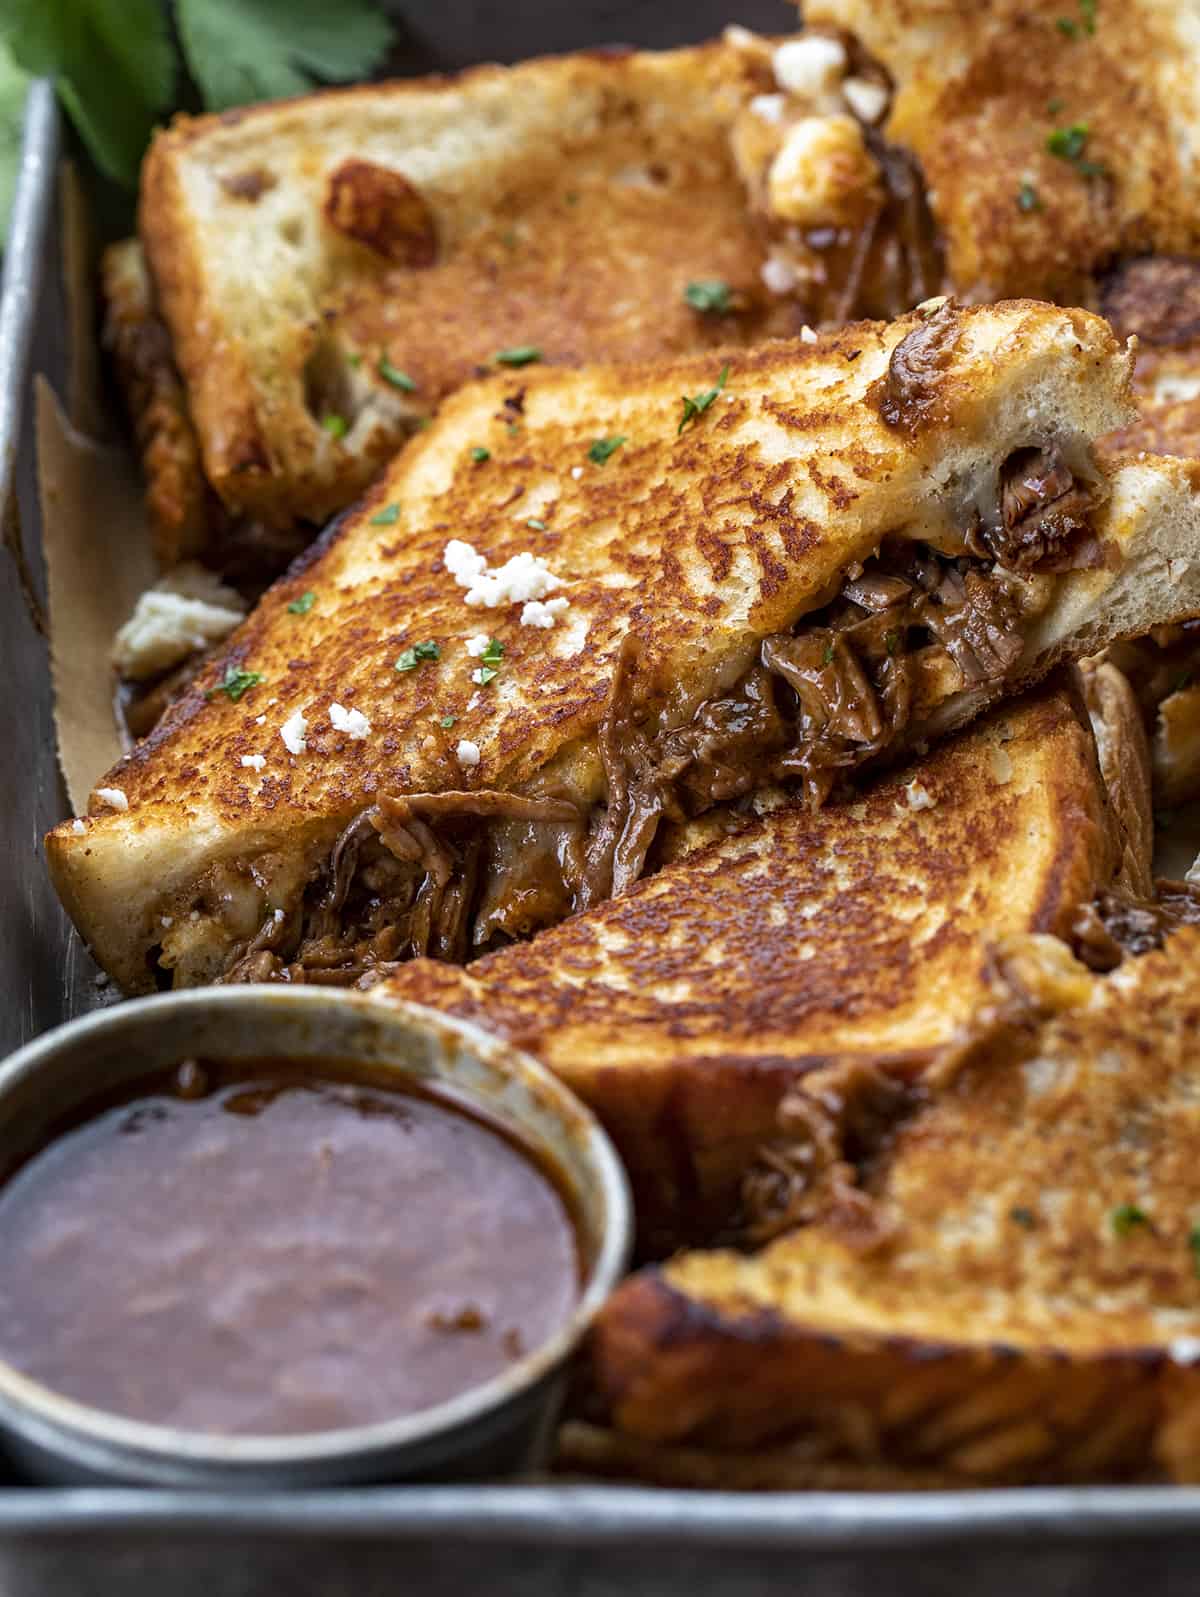 Birria Grilled Cheese Sandwiches in a Dish Next to Sauce. Dinner, Supper. Grilled Cheese, Best Grilled Cheese, Birria Grilled Cheese Sandwich, Shredded Beef Grilled Cheese, Superbowl Food, Game Day Food, Football Recipes, i am homesteader, iamhomesteader